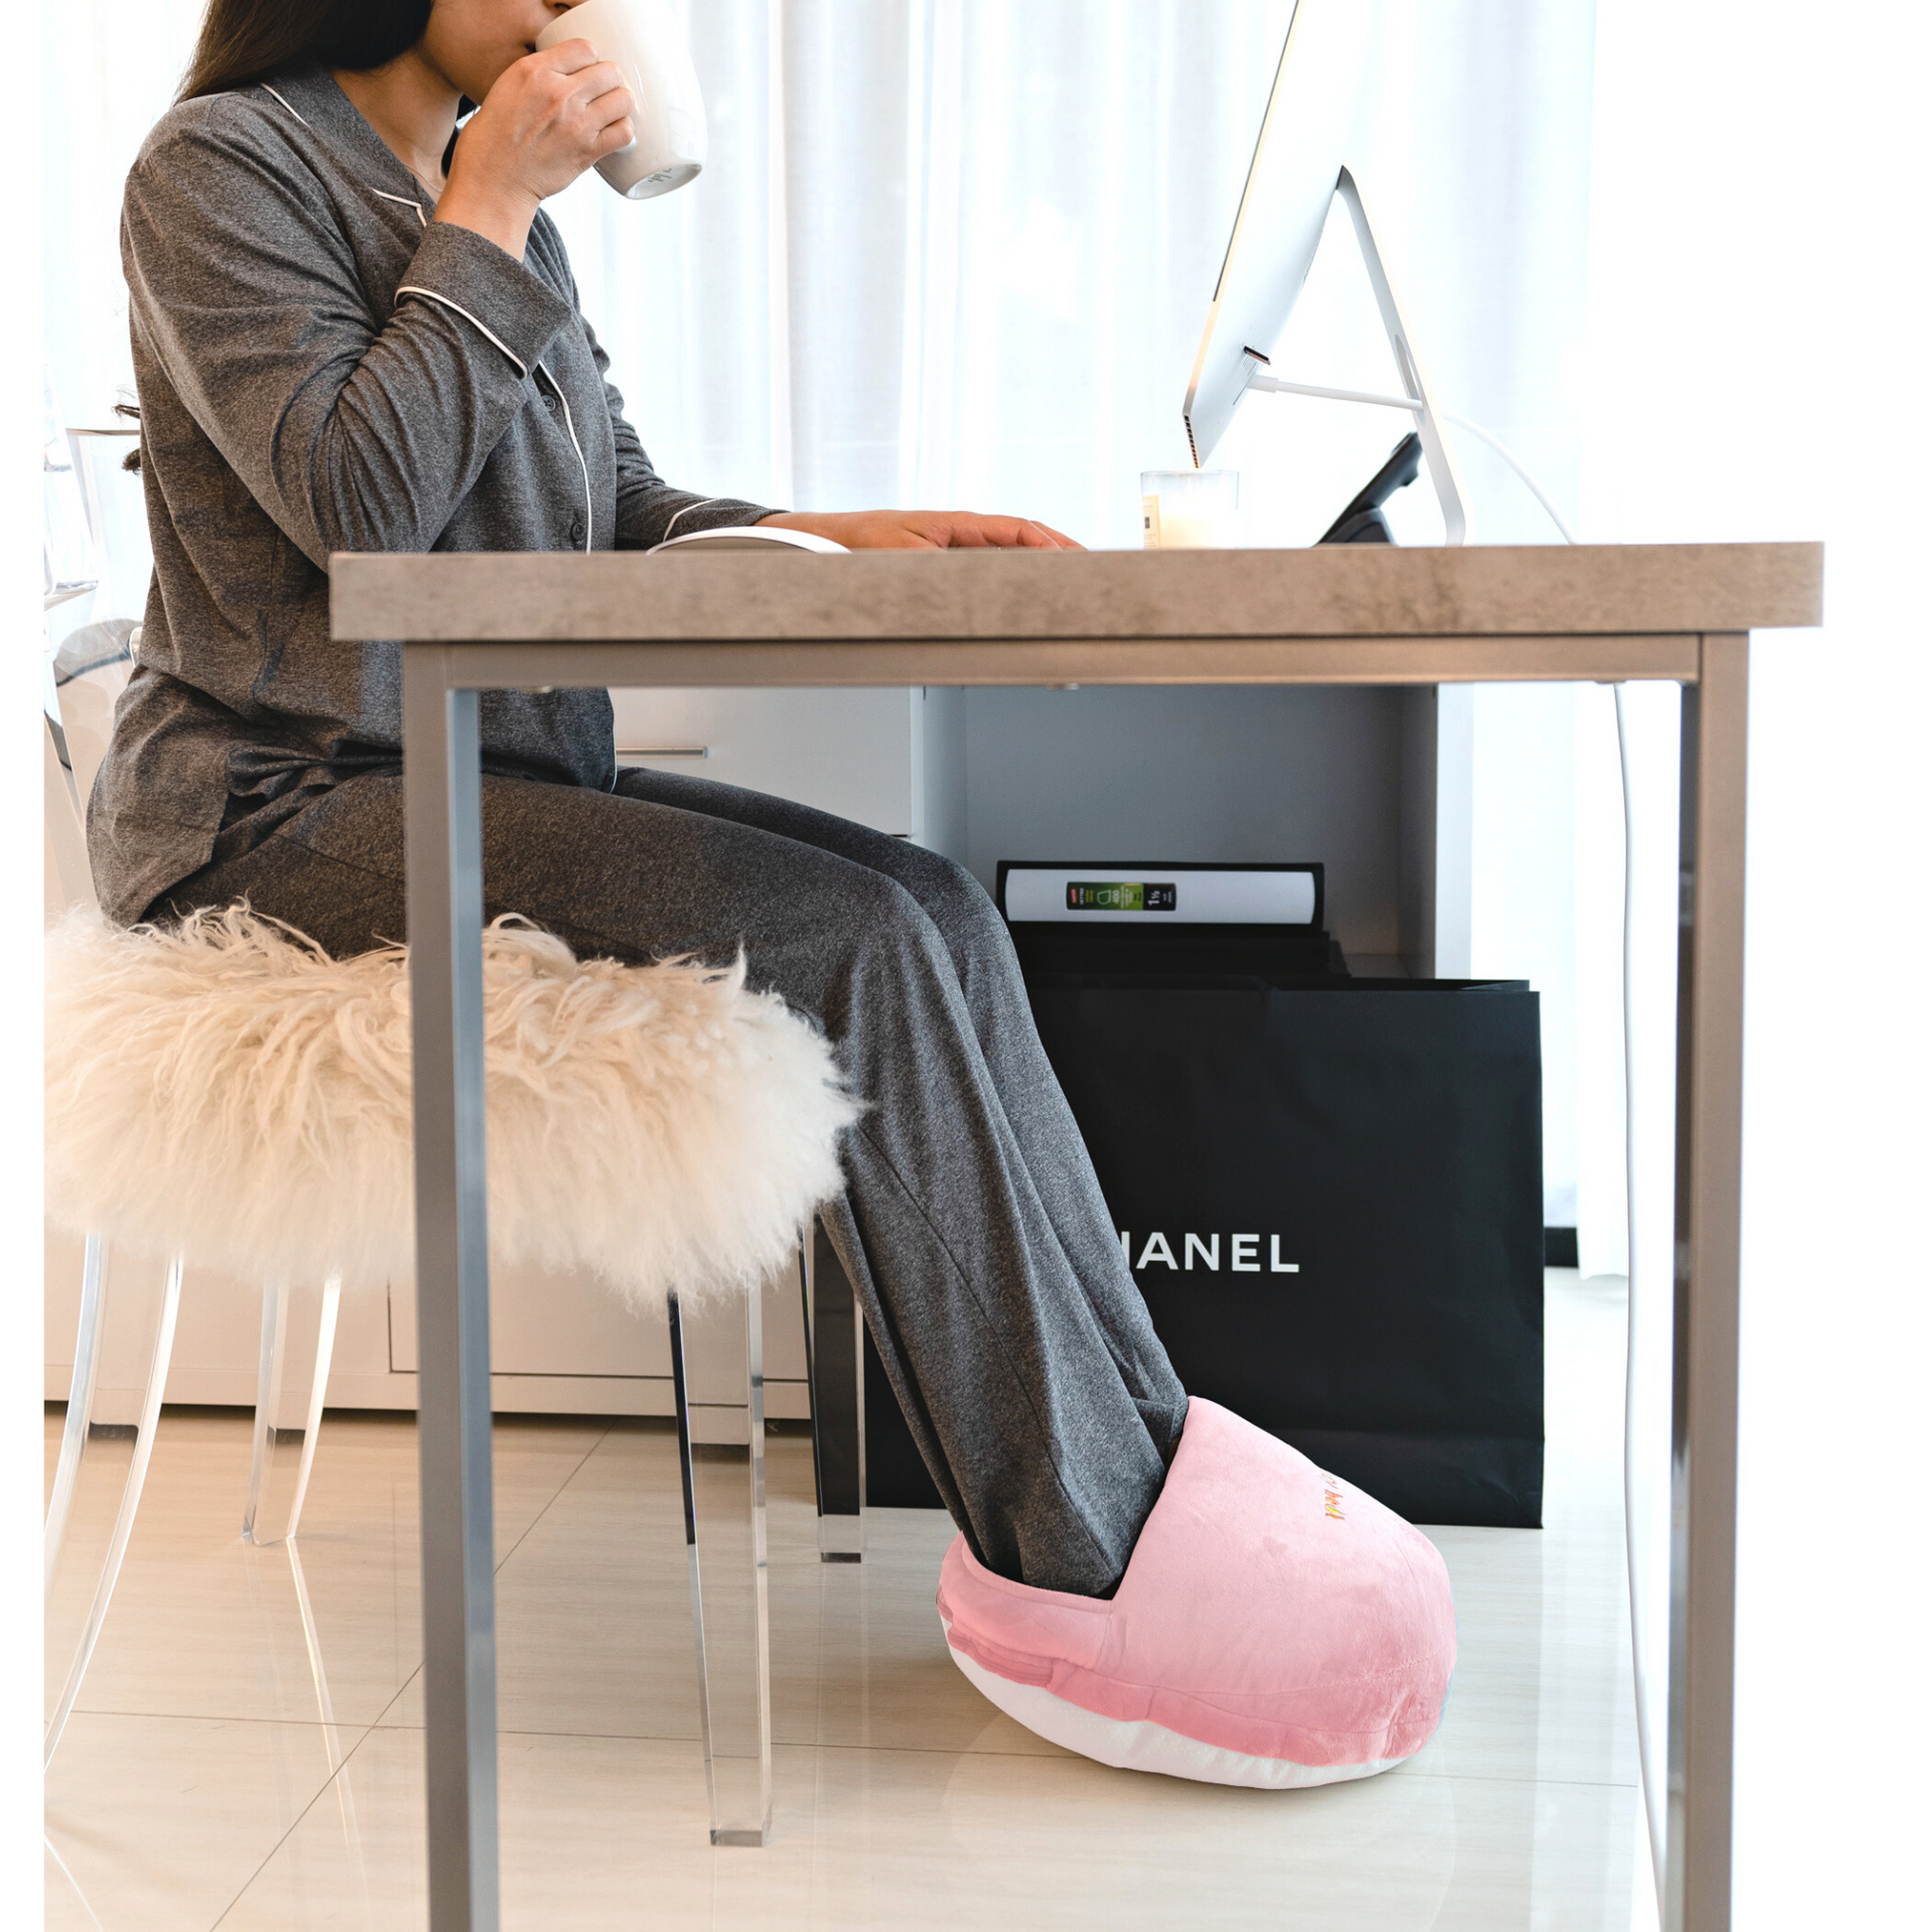 Foldable Electric Foot Warmer Under Desk for Leg and Feet - ASL994 -  IdeaStage Promotional Products